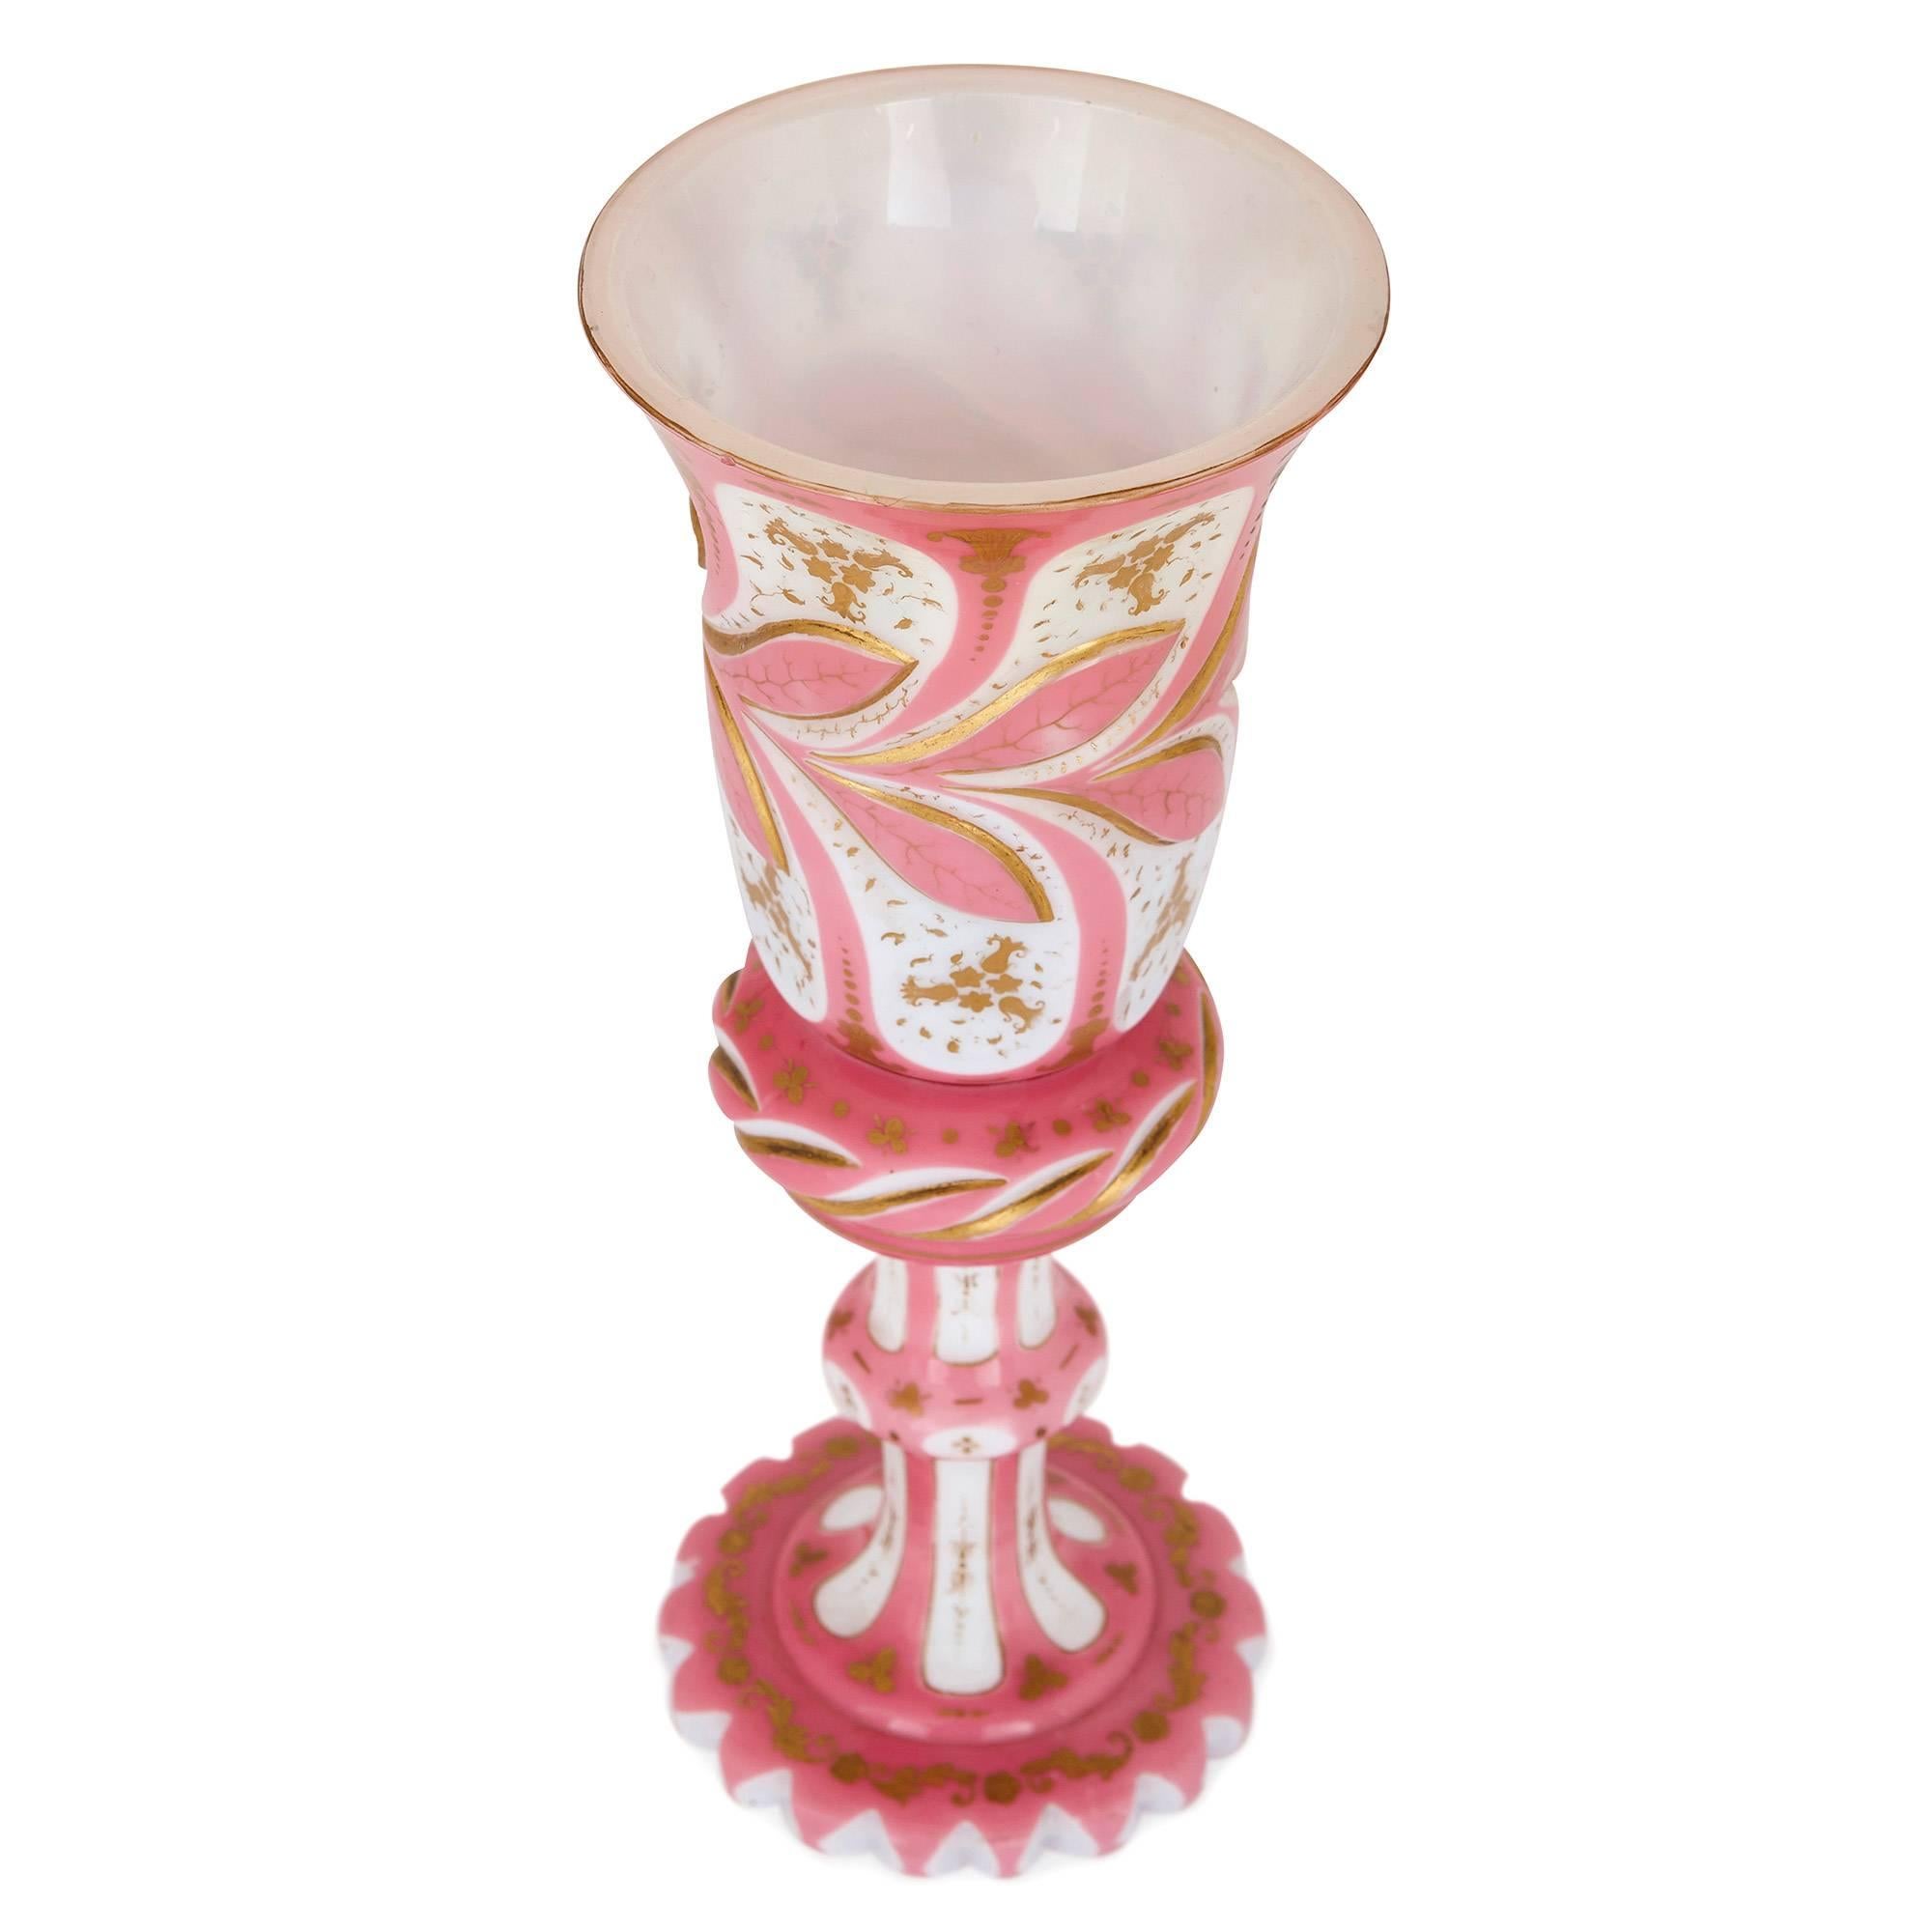 This beautiful, precious cup represents some of the best in Bohemian glass design in the 19th century. It was the Bohemian glass makers in the 19th century who perfected the technically challenging technique of glass overlay, which involves placing